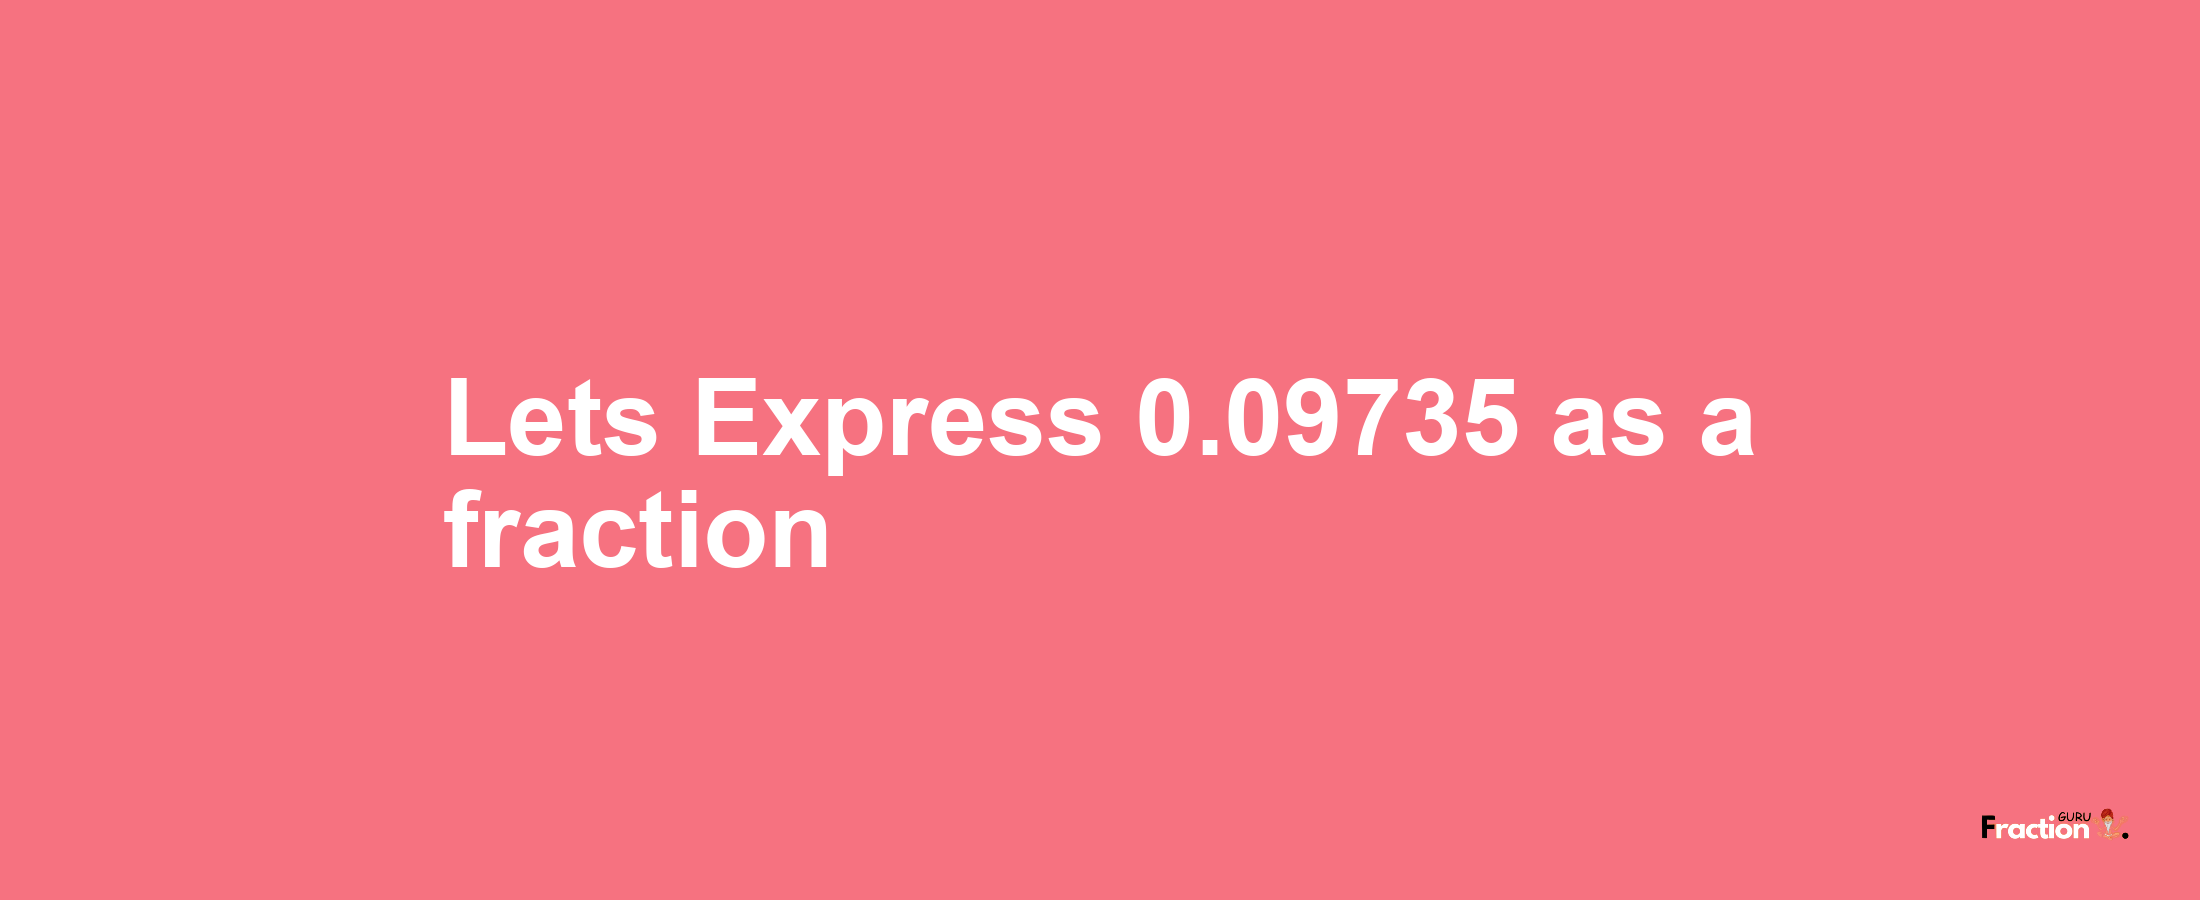 Lets Express 0.09735 as afraction